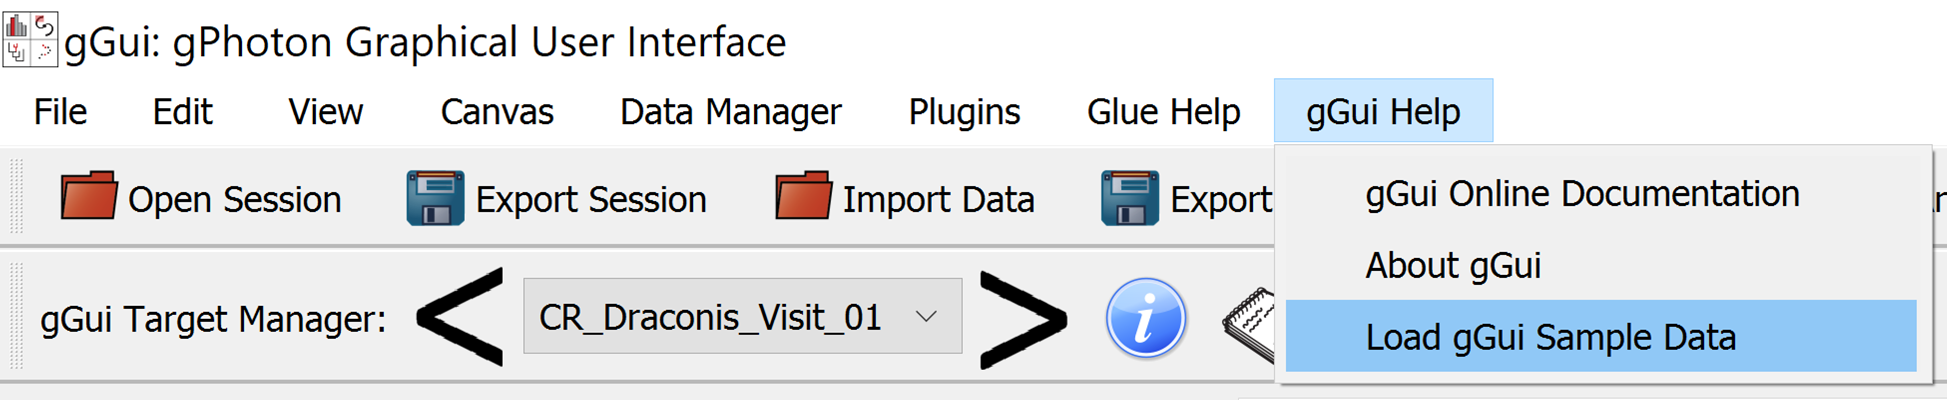 To load sample data, simply select "Load gGui Sample Data" under the "gGui Help" menu.